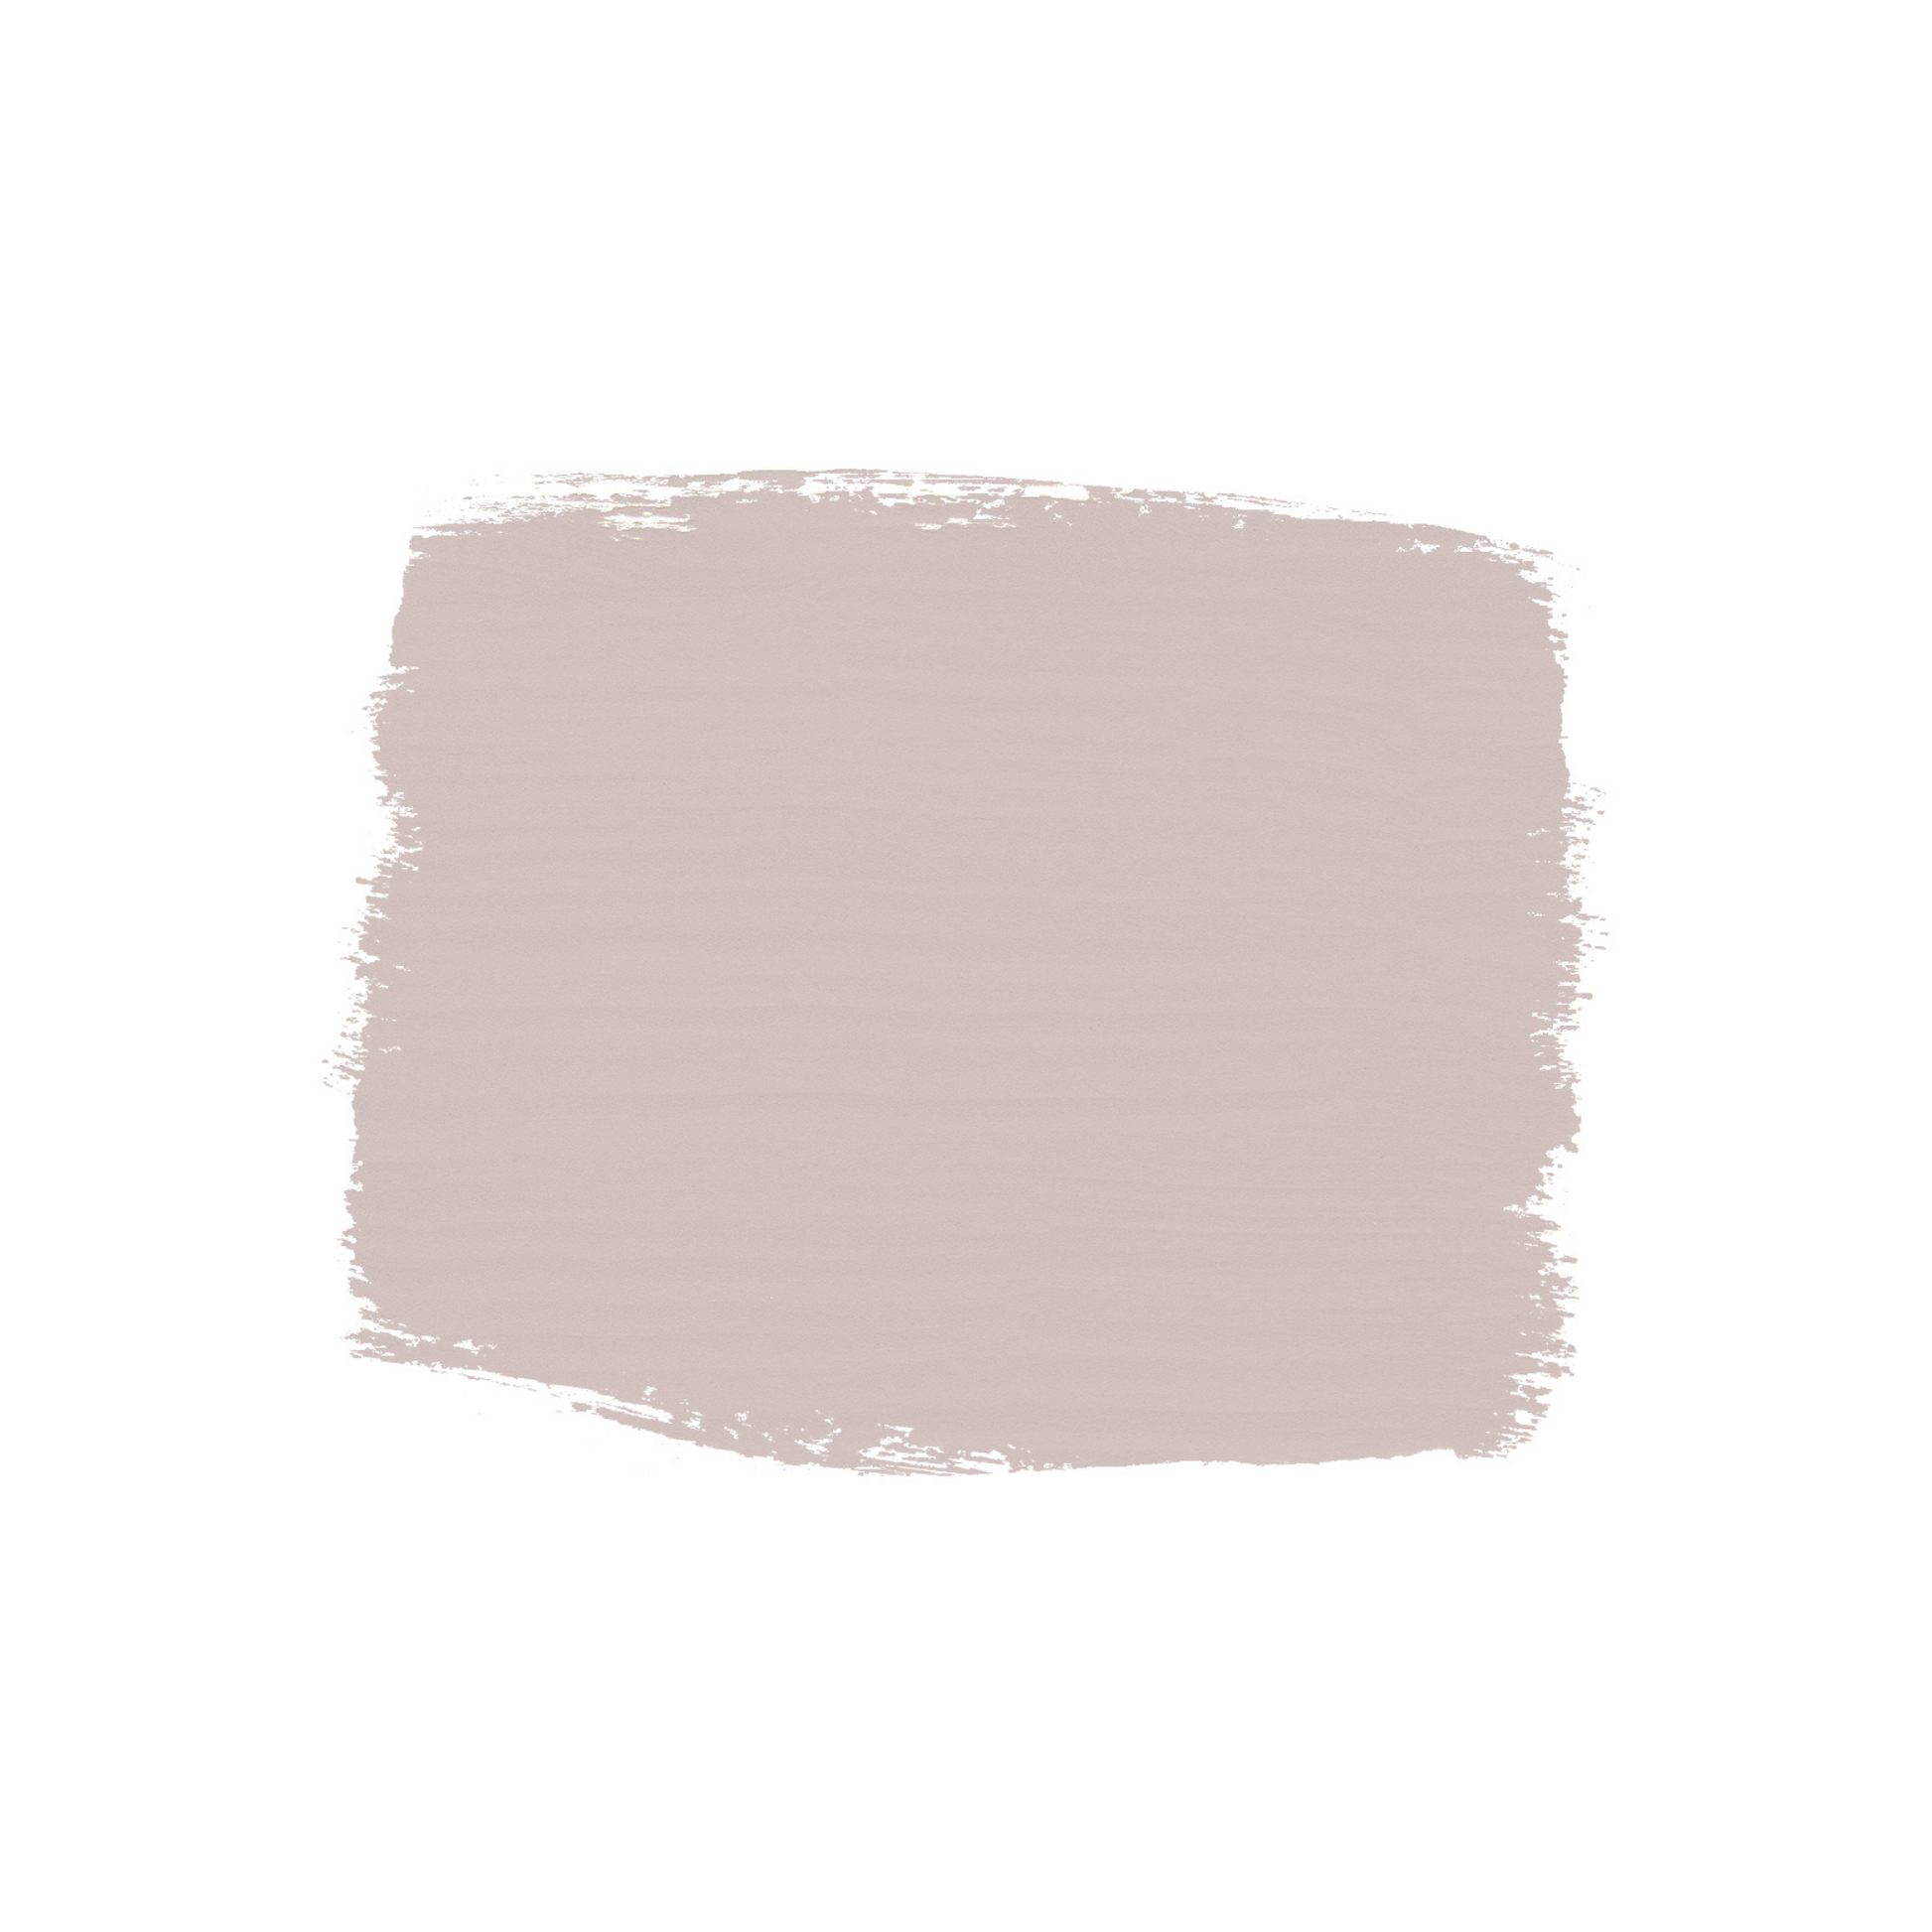 Swatch of Paloma Annie Sloan Chalk Paint.